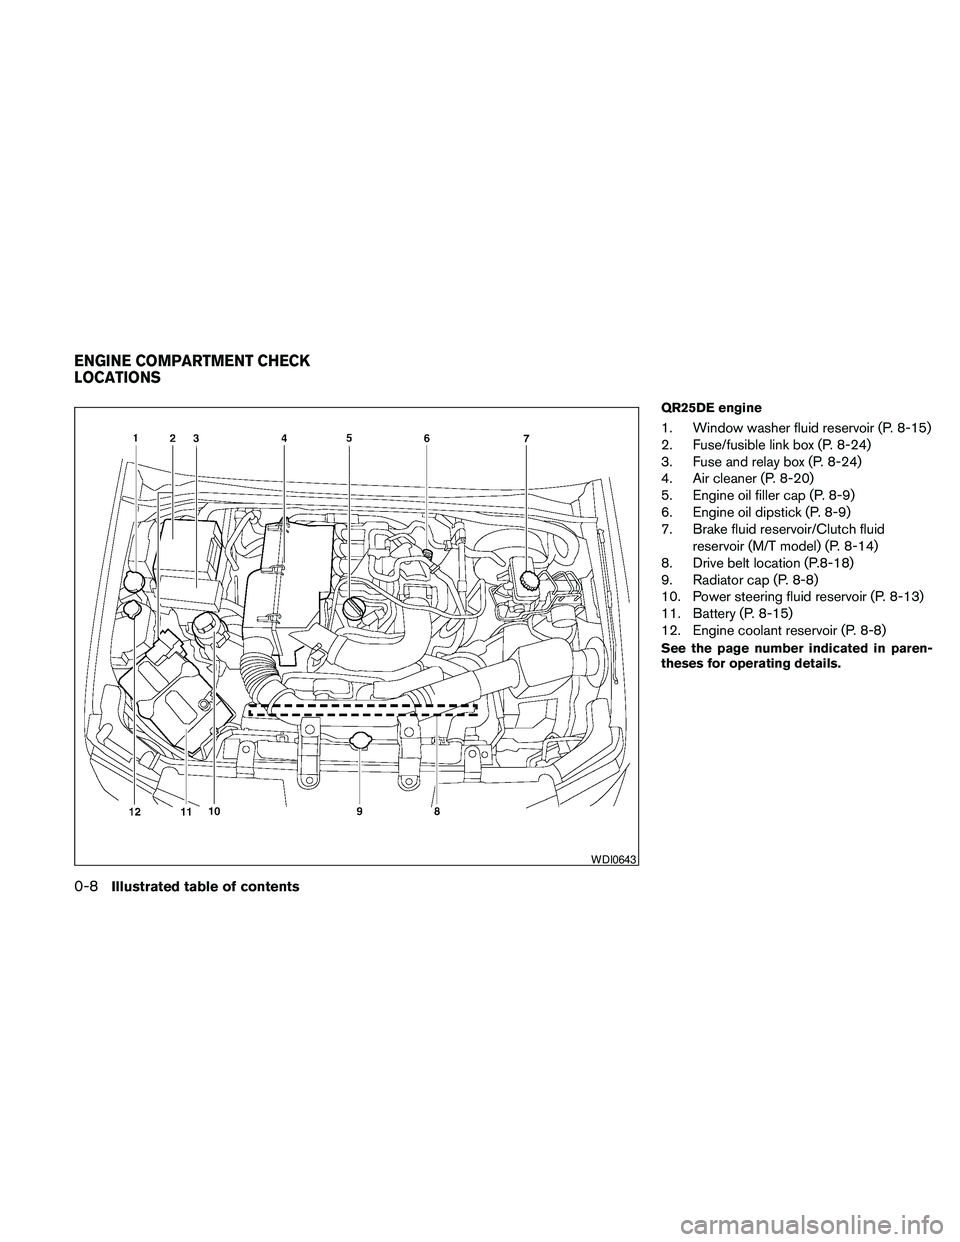 NISSAN FRONTIER 2010  Owner´s Manual QR25DE engine
1. Window washer fluid reservoir (P. 8-15)
2. Fuse/fusible link box (P. 8-24)
3. Fuse and relay box (P. 8-24)
4. Air cleaner (P. 8-20)
5. Engine oil filler cap (P. 8-9)
6. Engine oil dip